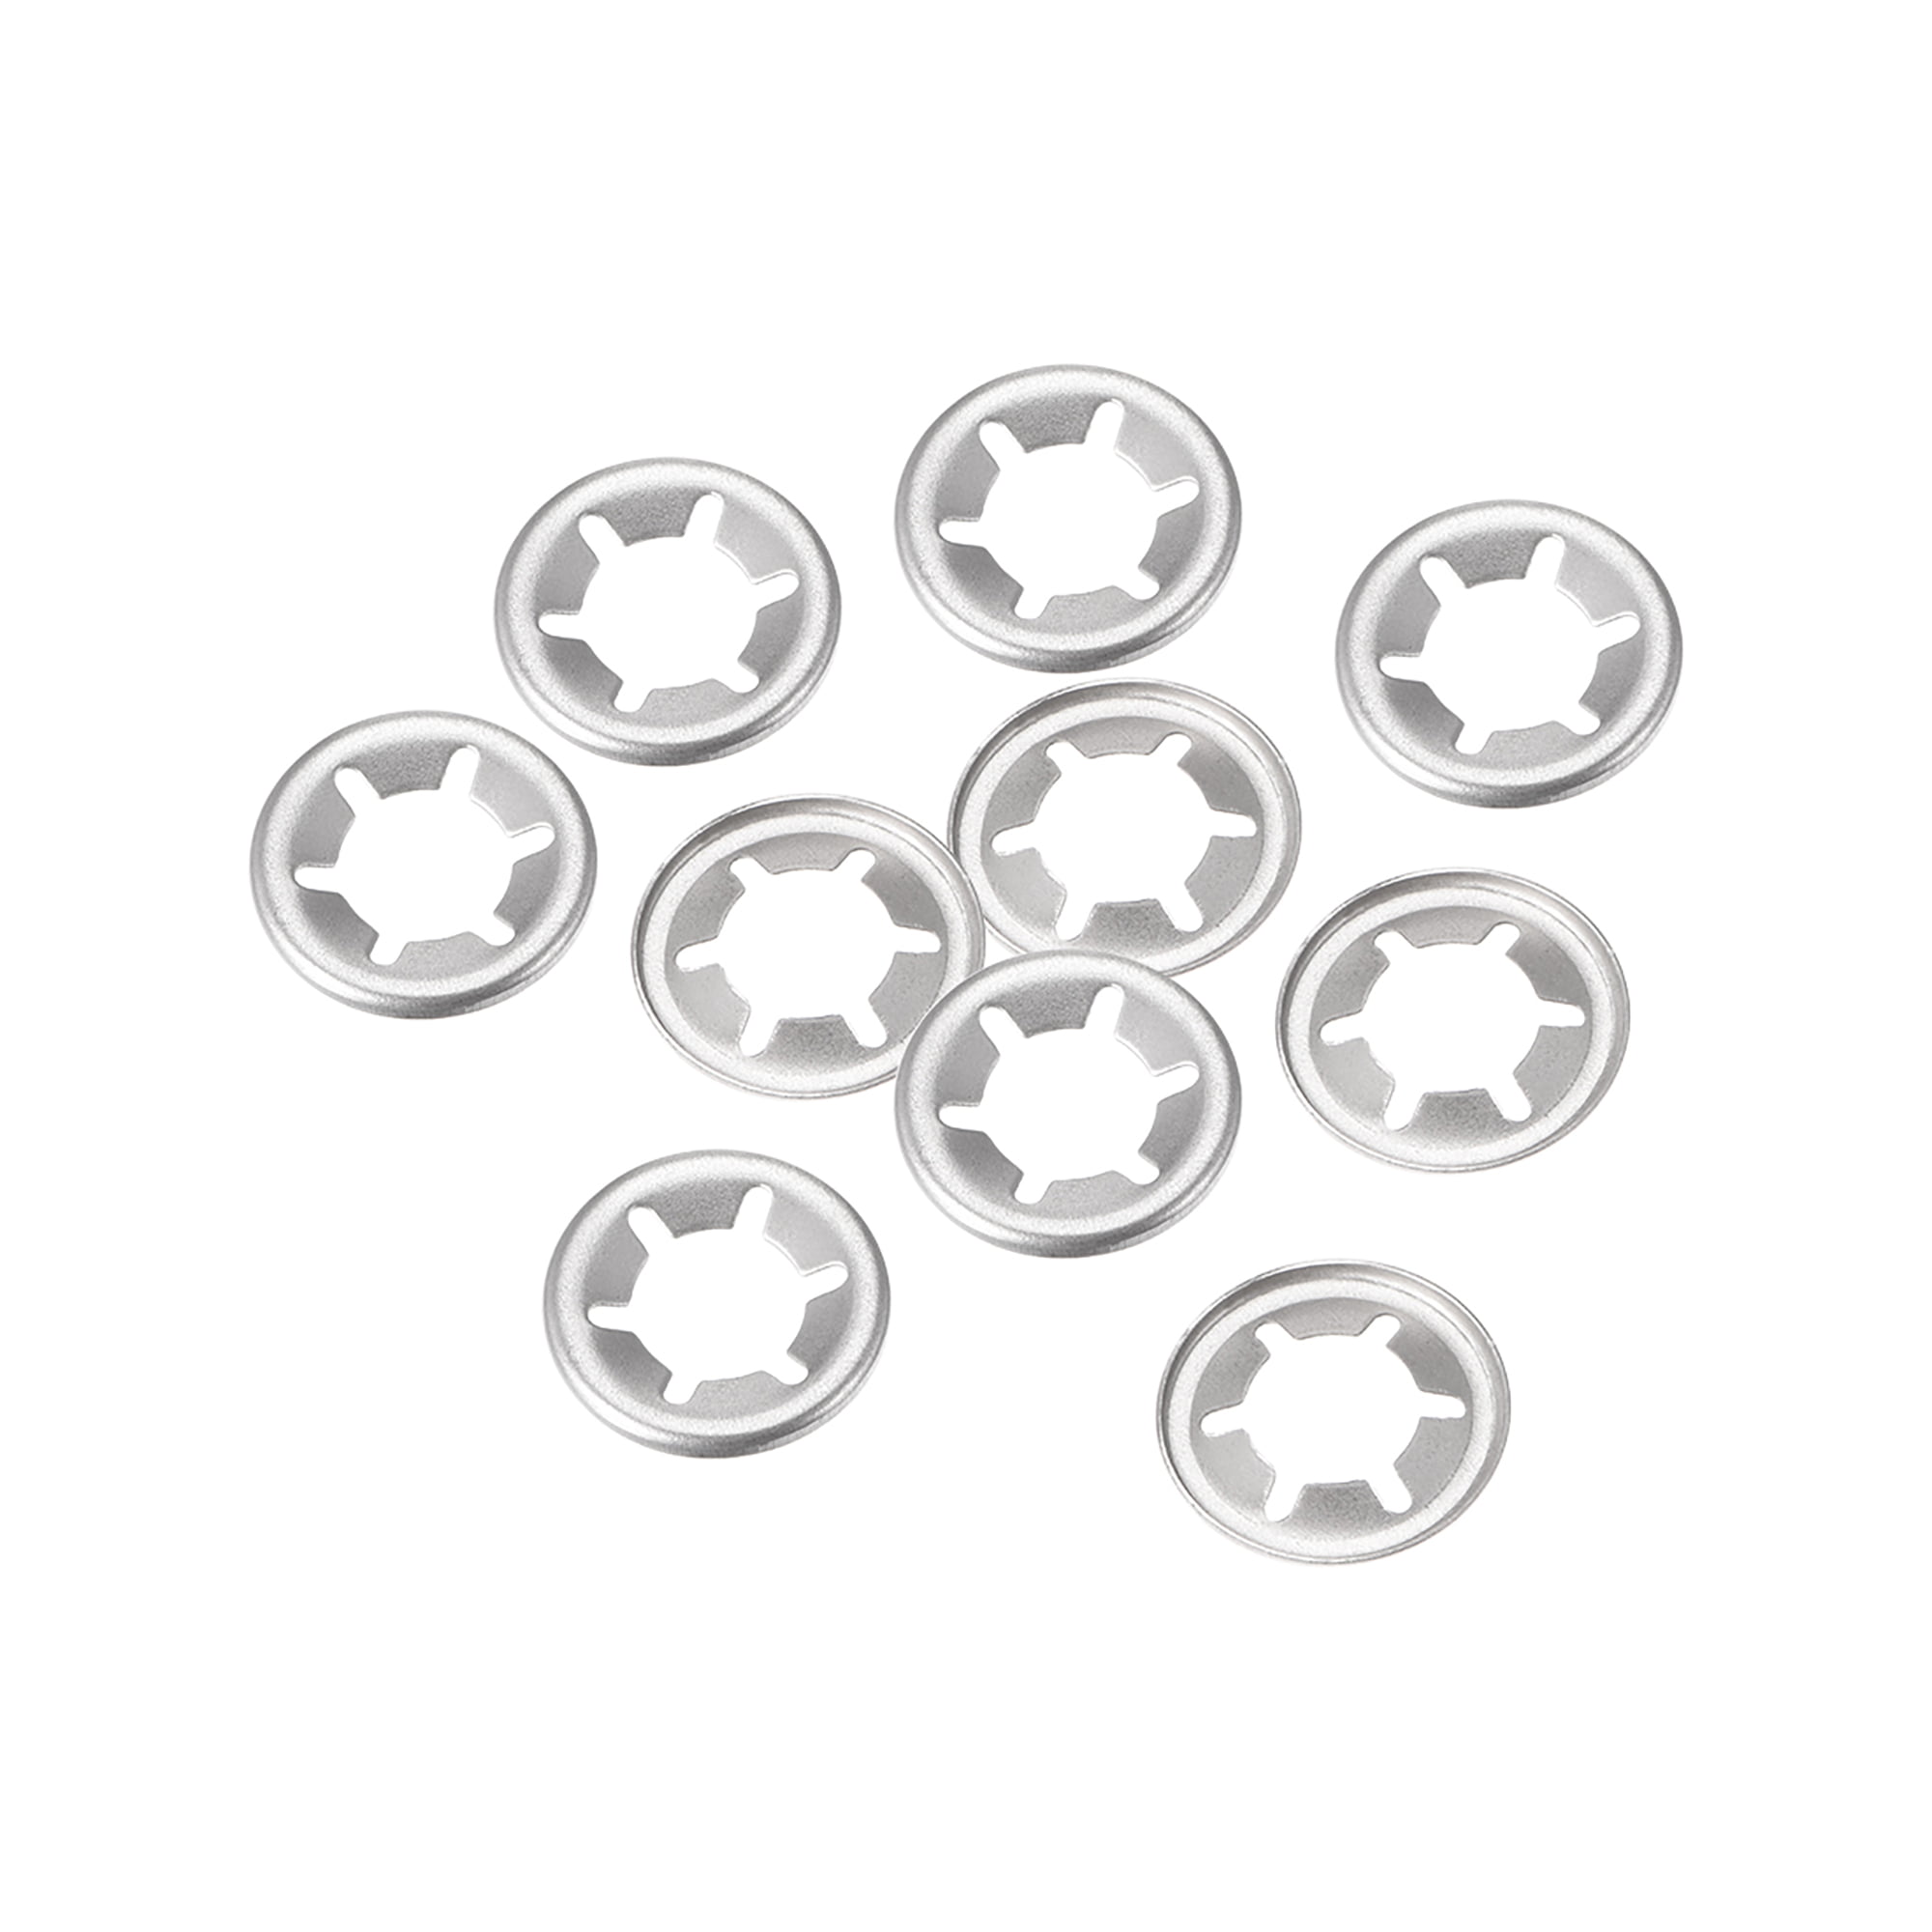 uxcell Internal Tooth Star Washers M7 x 15mm 65Mn Black Oxide Finish Push On Lock Washer Locking Clips Fastener 100pcs 